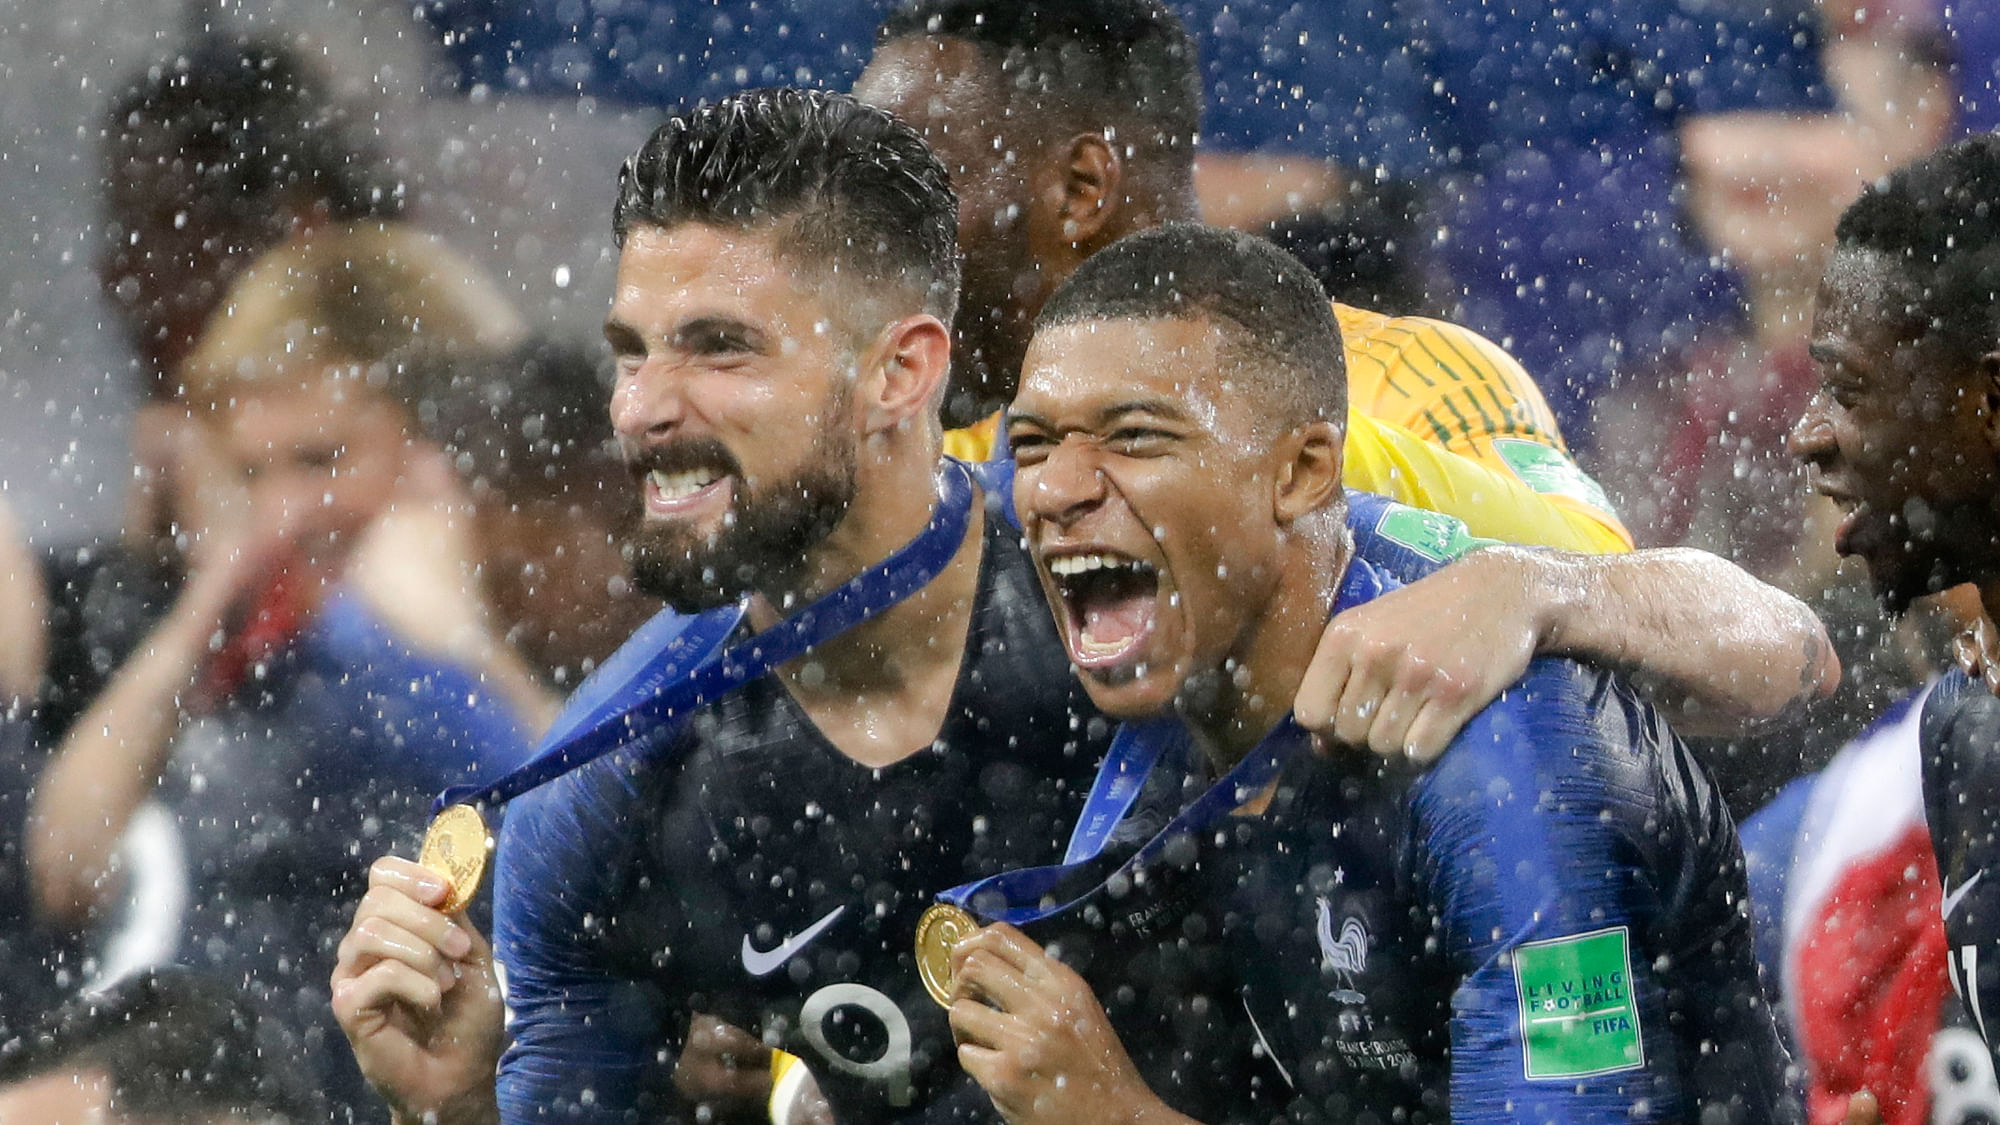 France’s Kylian Mbappe, right, and teammate Olivier Giroud celebrates after the final match between France and Croatia at the 2018 soccer World Cup in the Luzhniki Stadium in Moscow, Russia, Sunday, July 15, 2018.